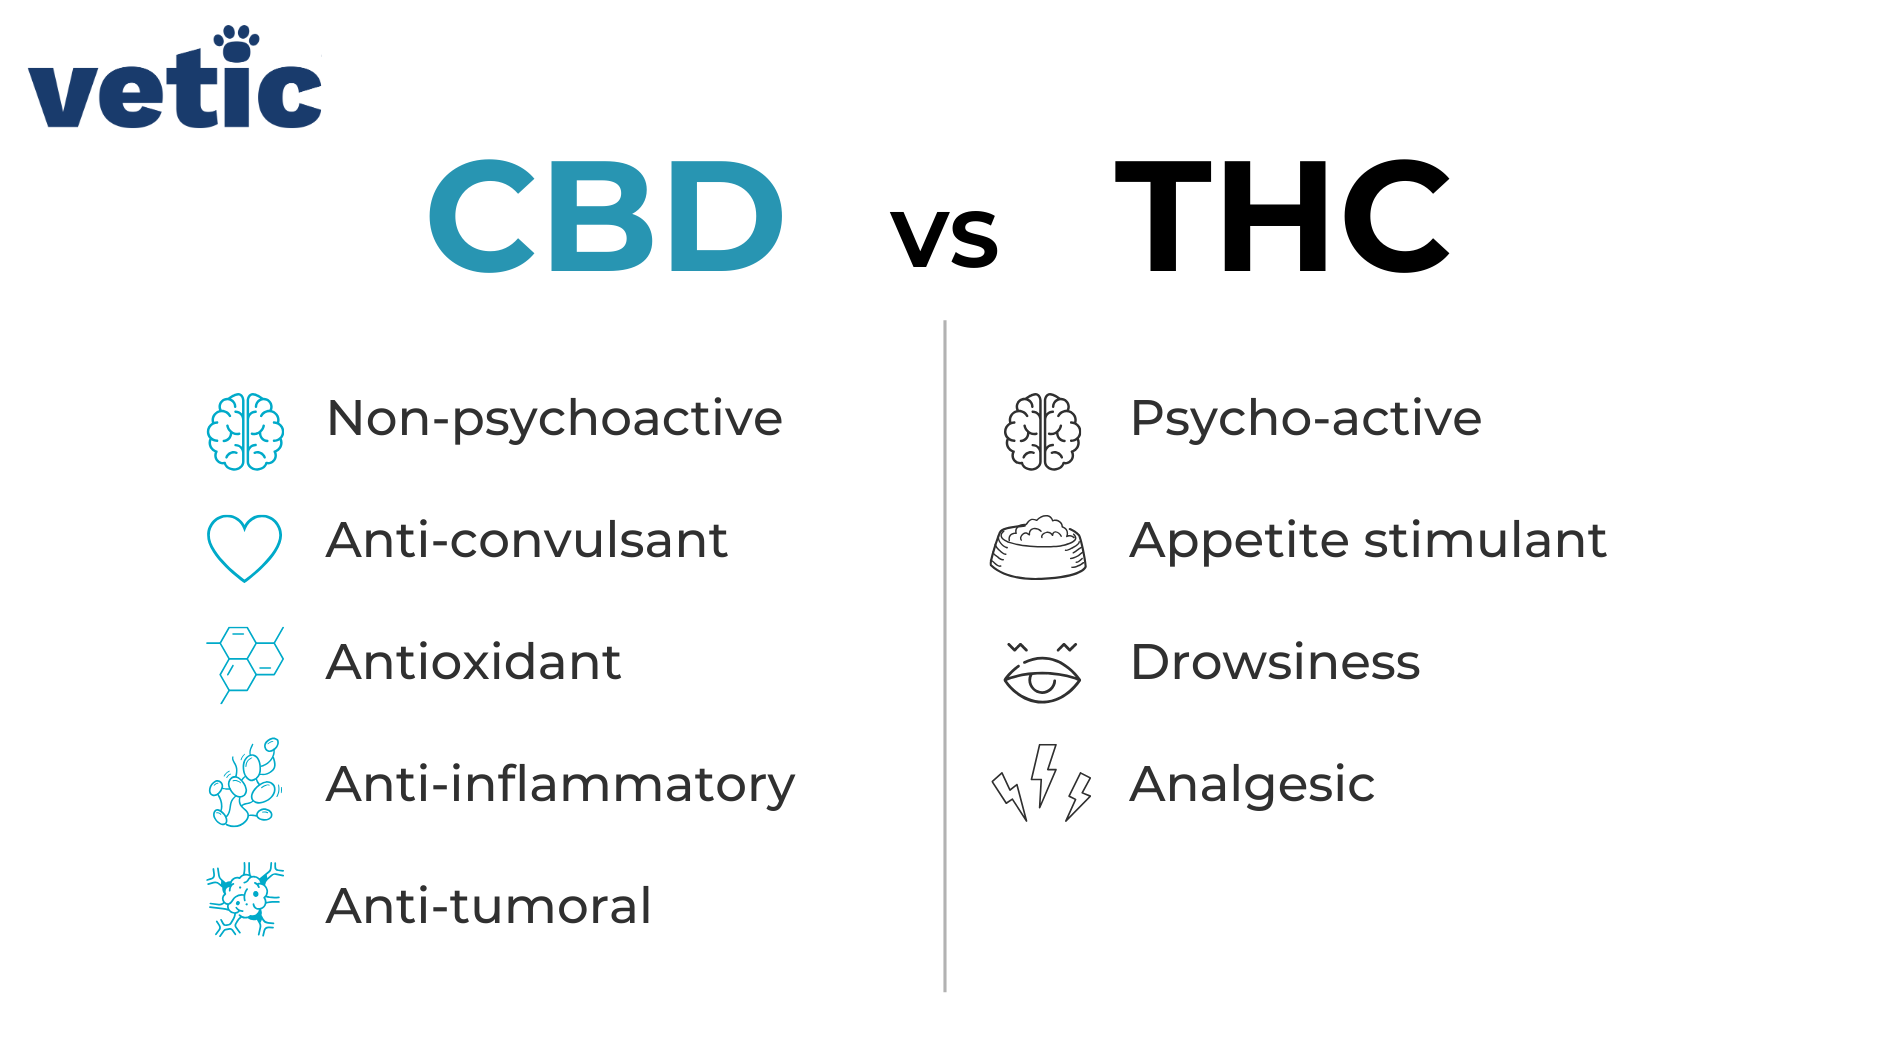 Infographic titled: CBD vs. THC. CBD oil for dogs only has CBD from hemp, which is not psychoactive. CBD is anti-oxidant, anti-convulsant, anti-inflammatory, and anti-tumoral. but THC is psychoactive and doesn't have these benefits.